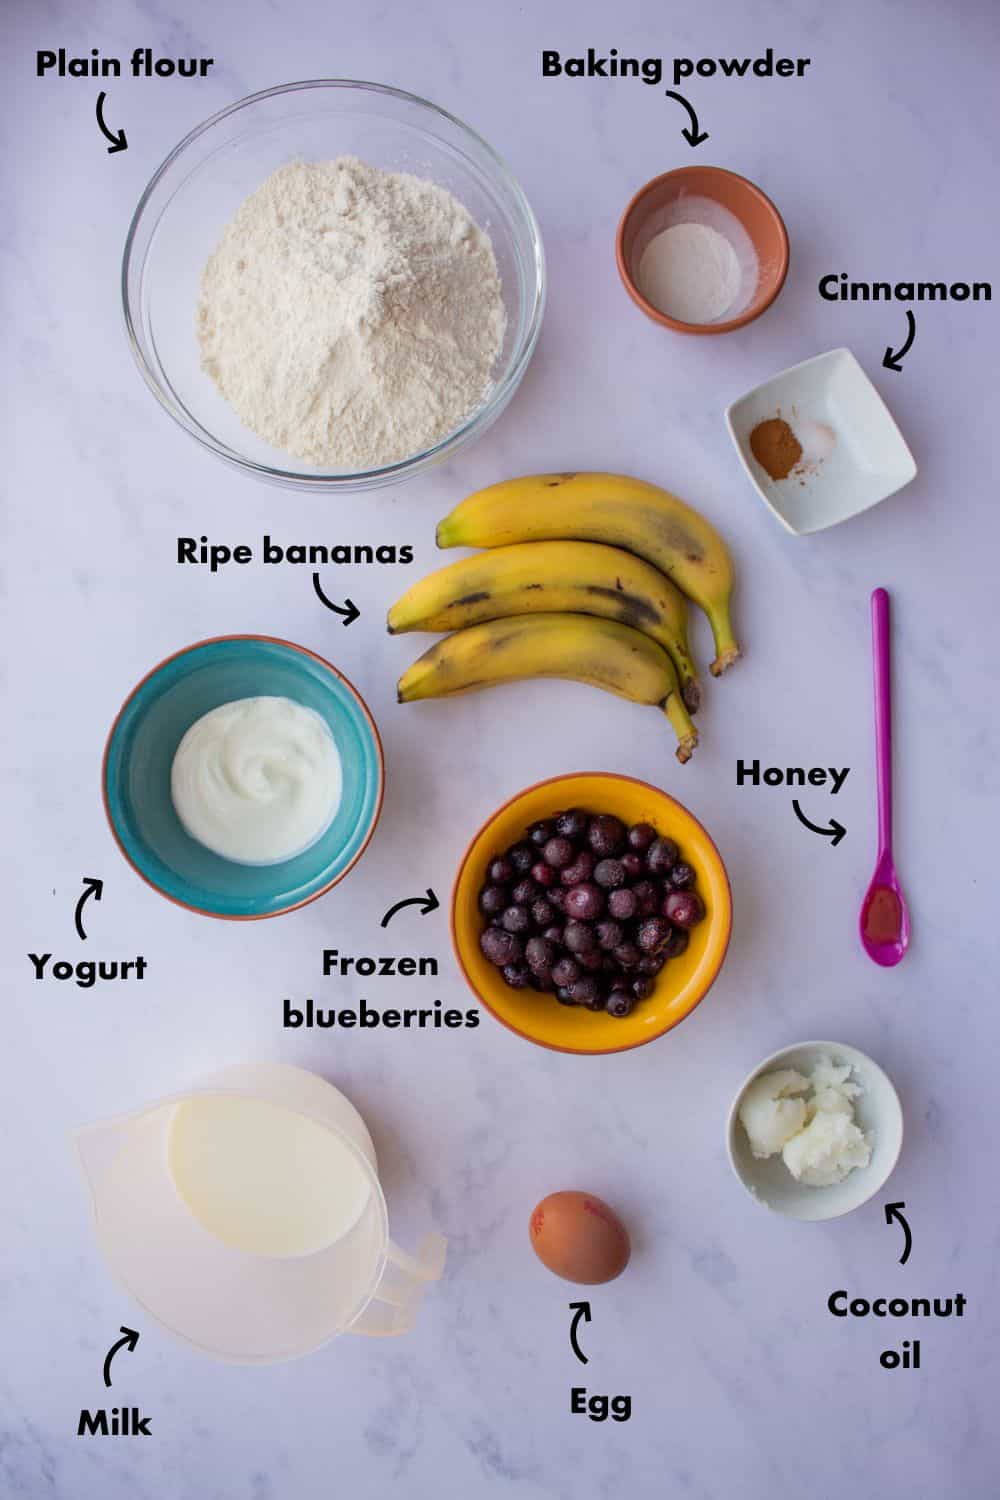 Ingredients to make banana and blueberry muffins laid out on a pale blue background and labelled.